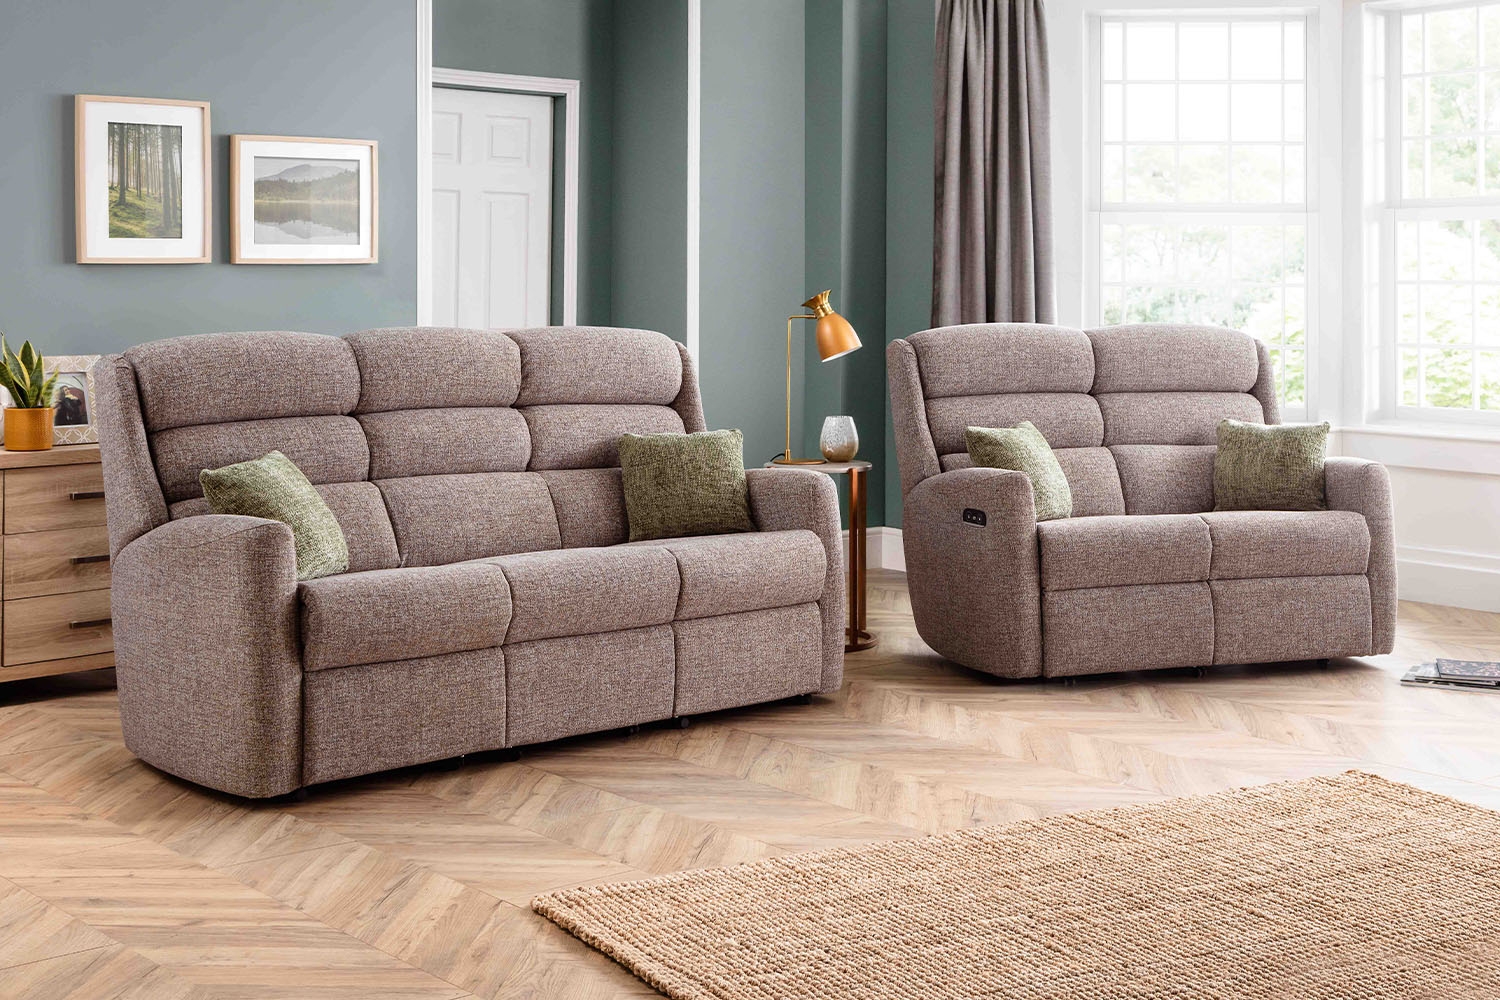 Celebrity Somersby Fabric Fixed 3 Seater Sofa (Split) - Furniture World